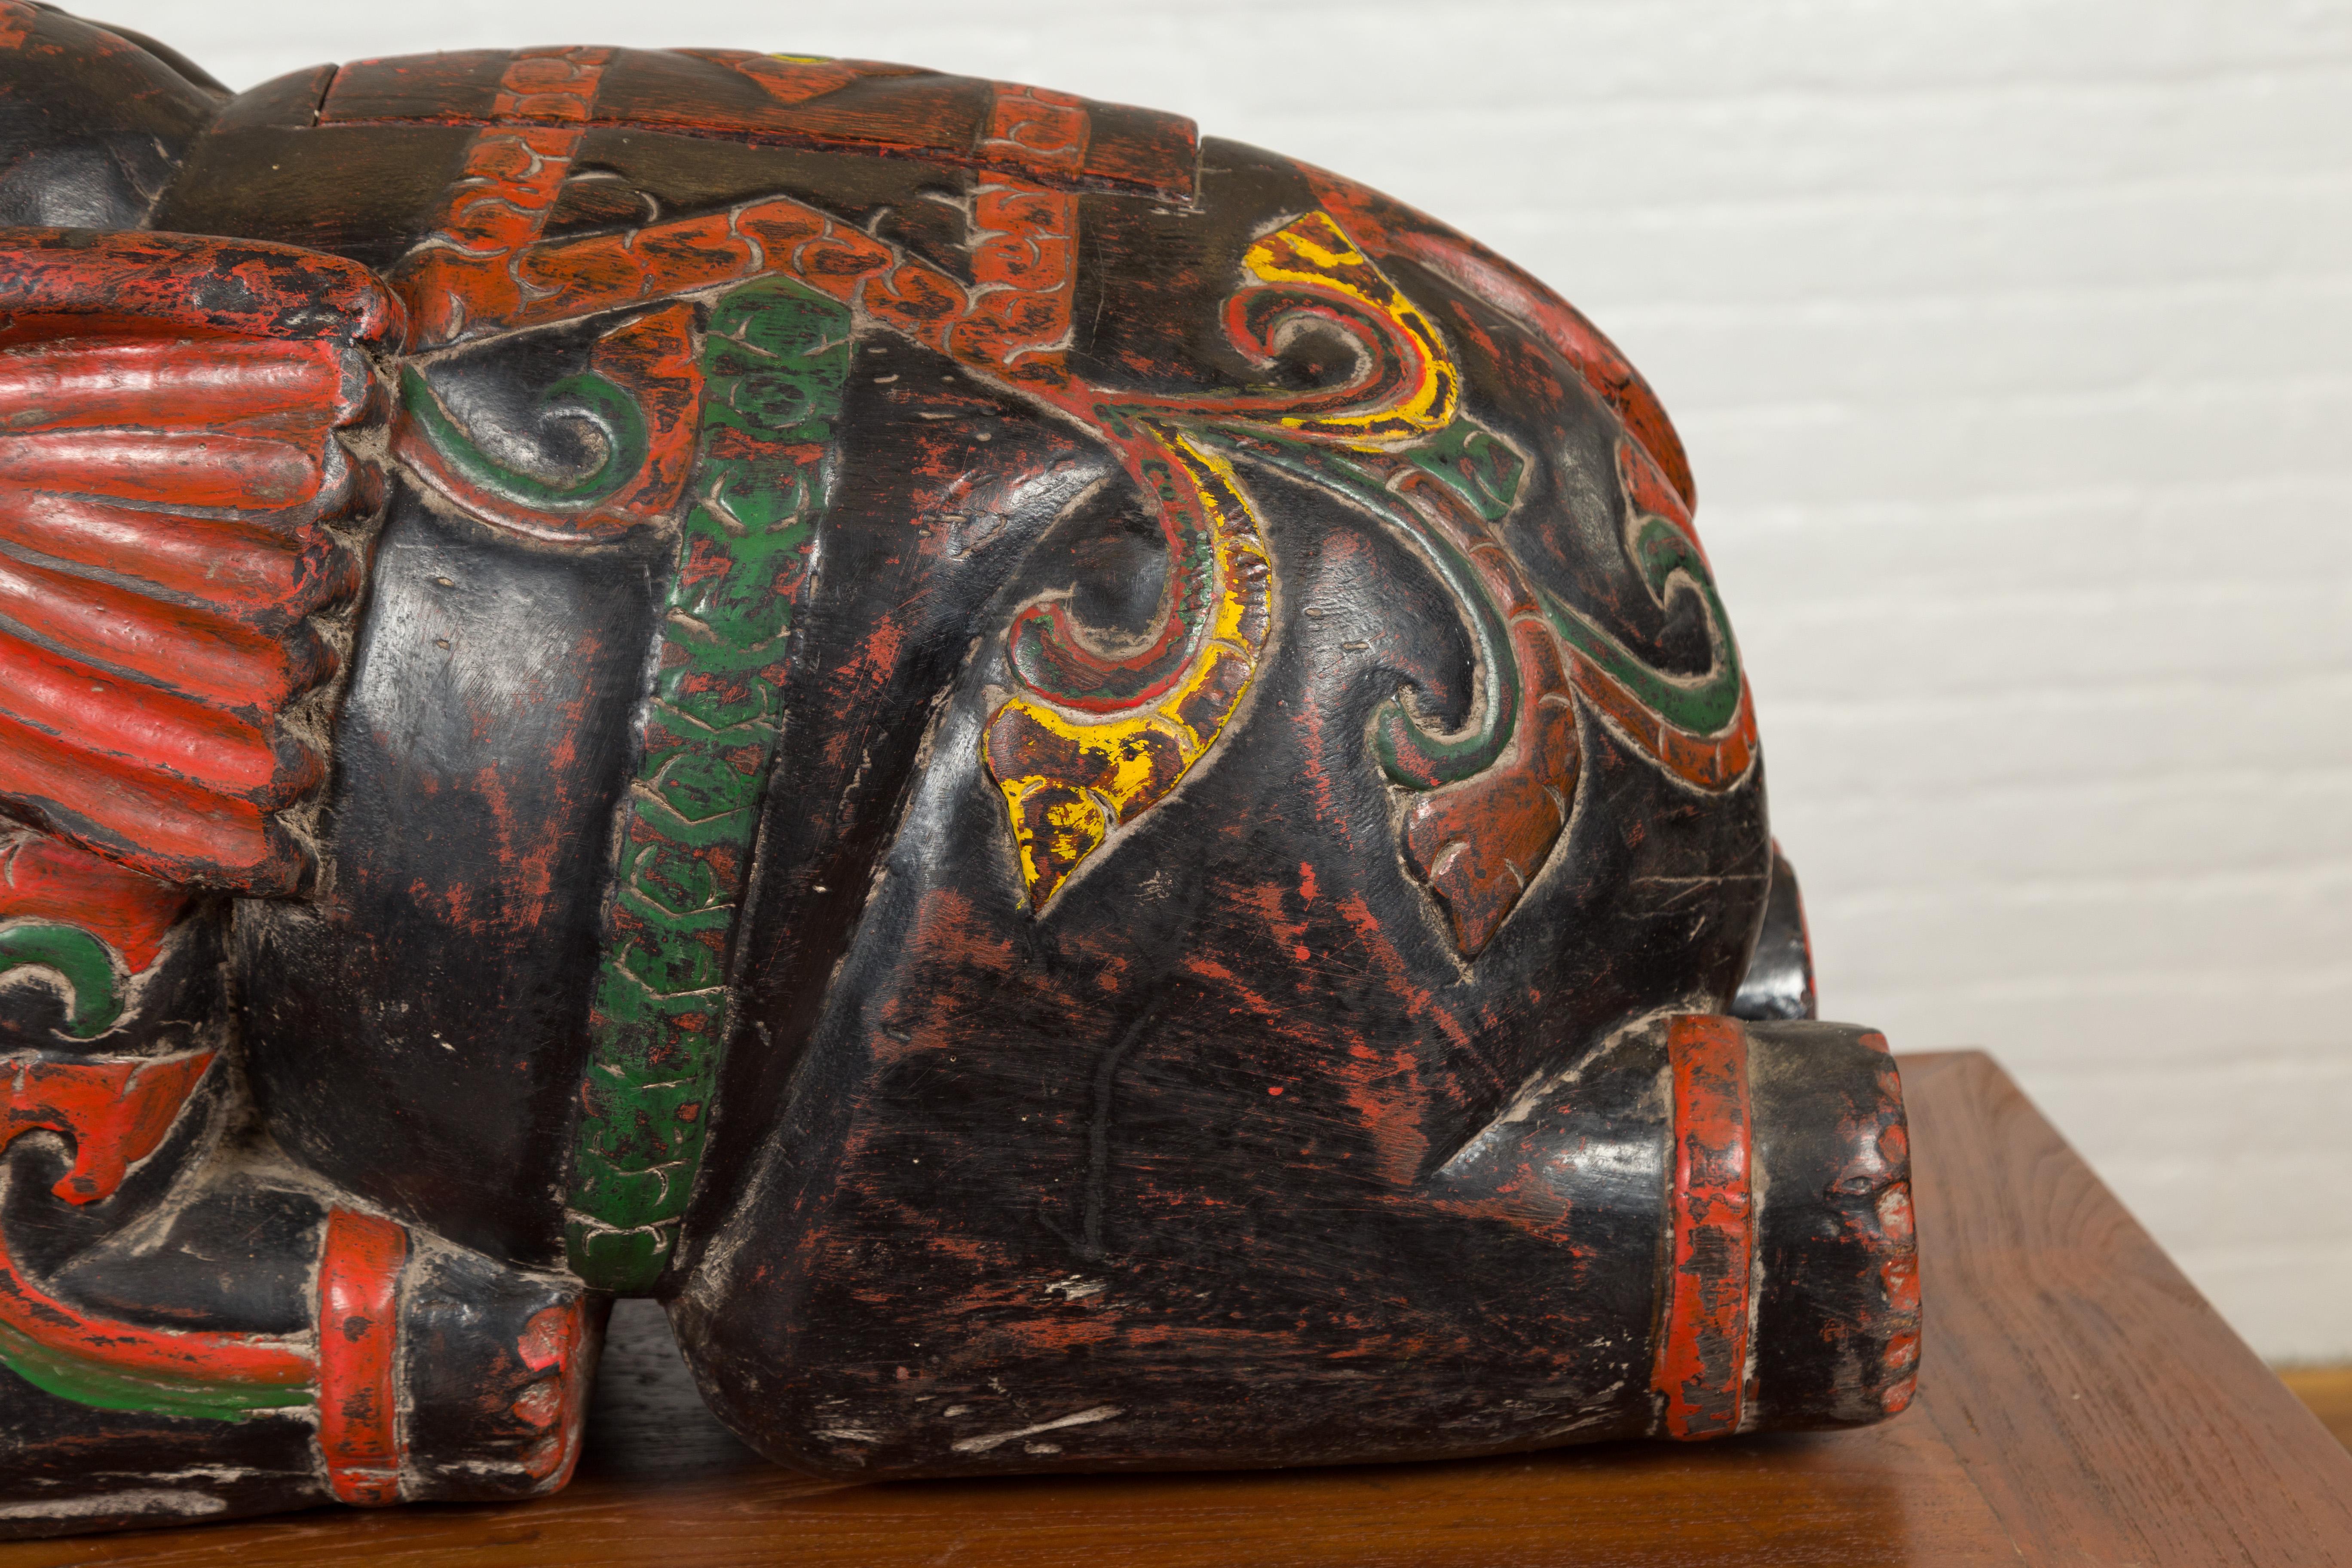 Carved Handmade Asian Elephant Sculpture with Incised Decor and Multi-Color Finish